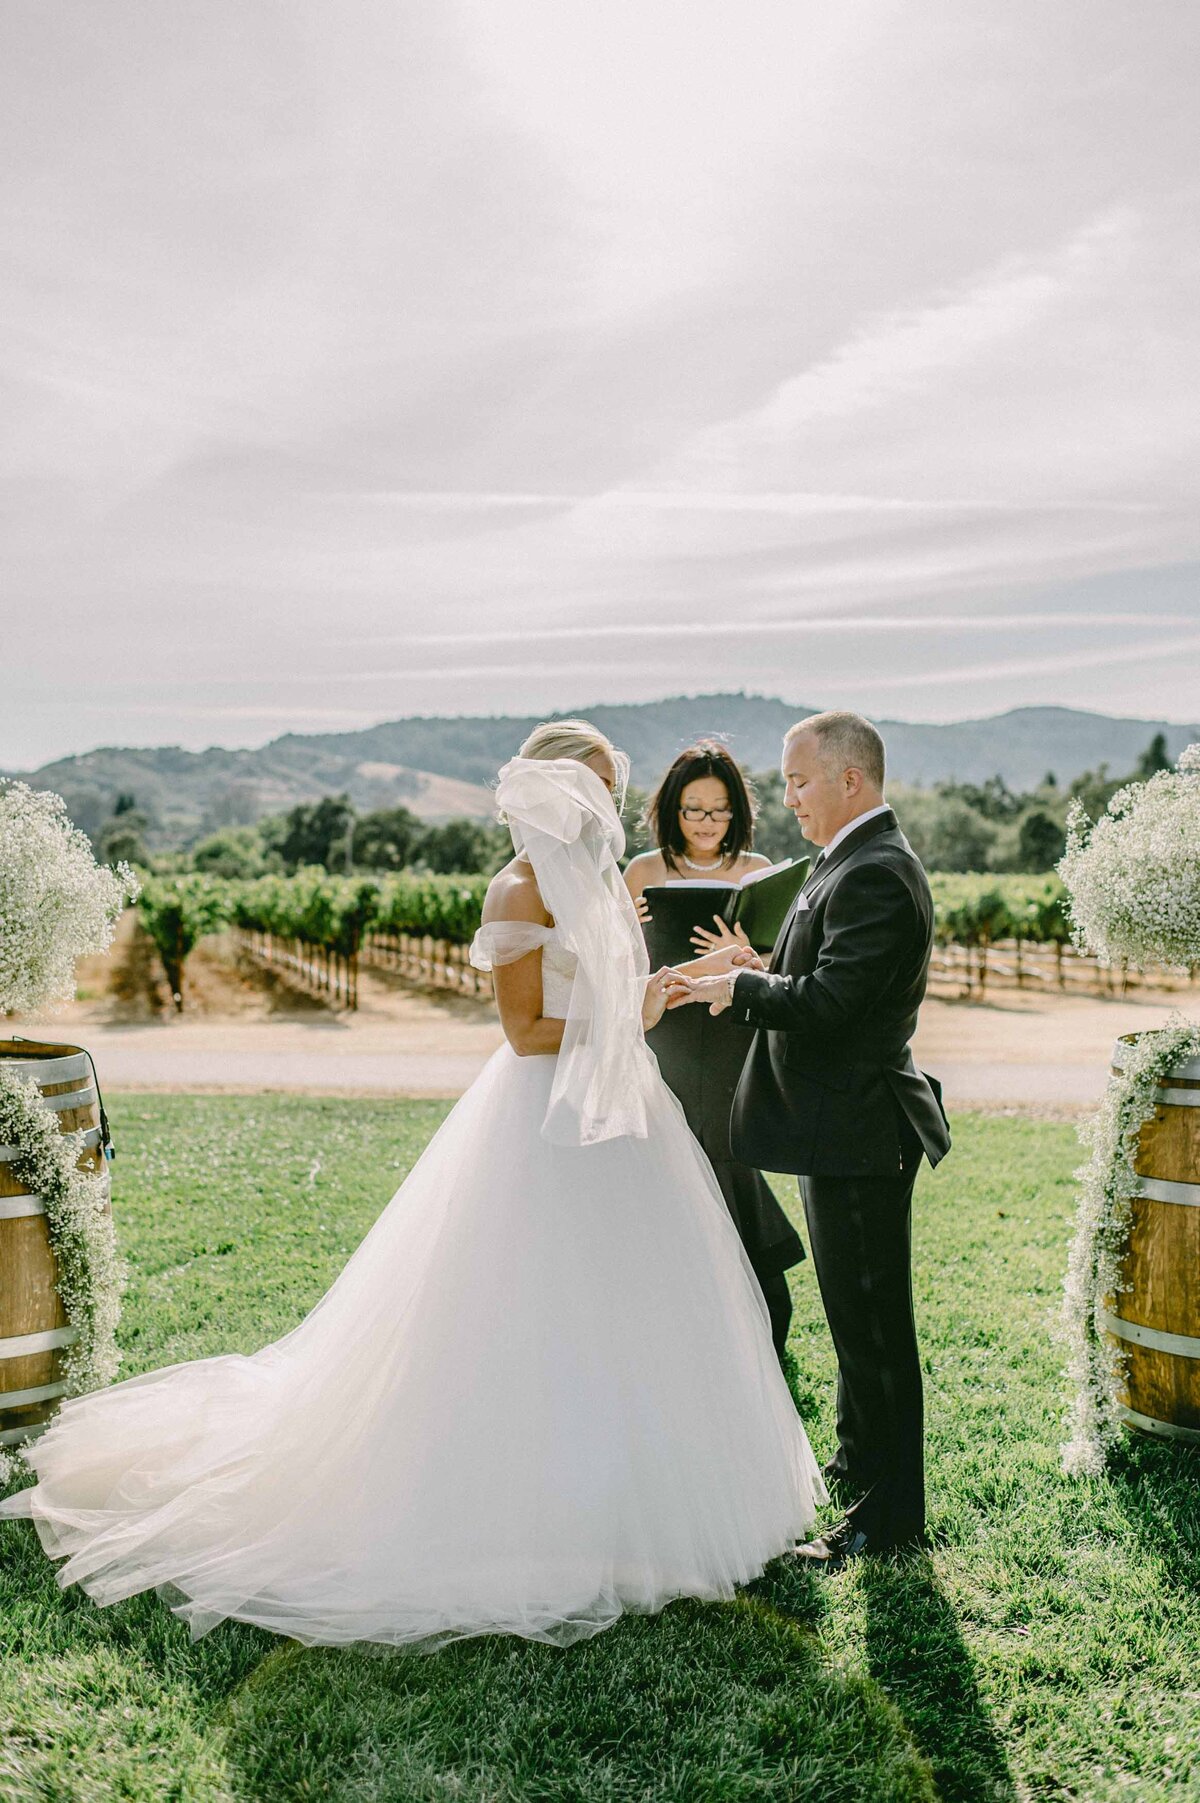 chateau st jean winery wedding ceremony l hewitt photography (9)